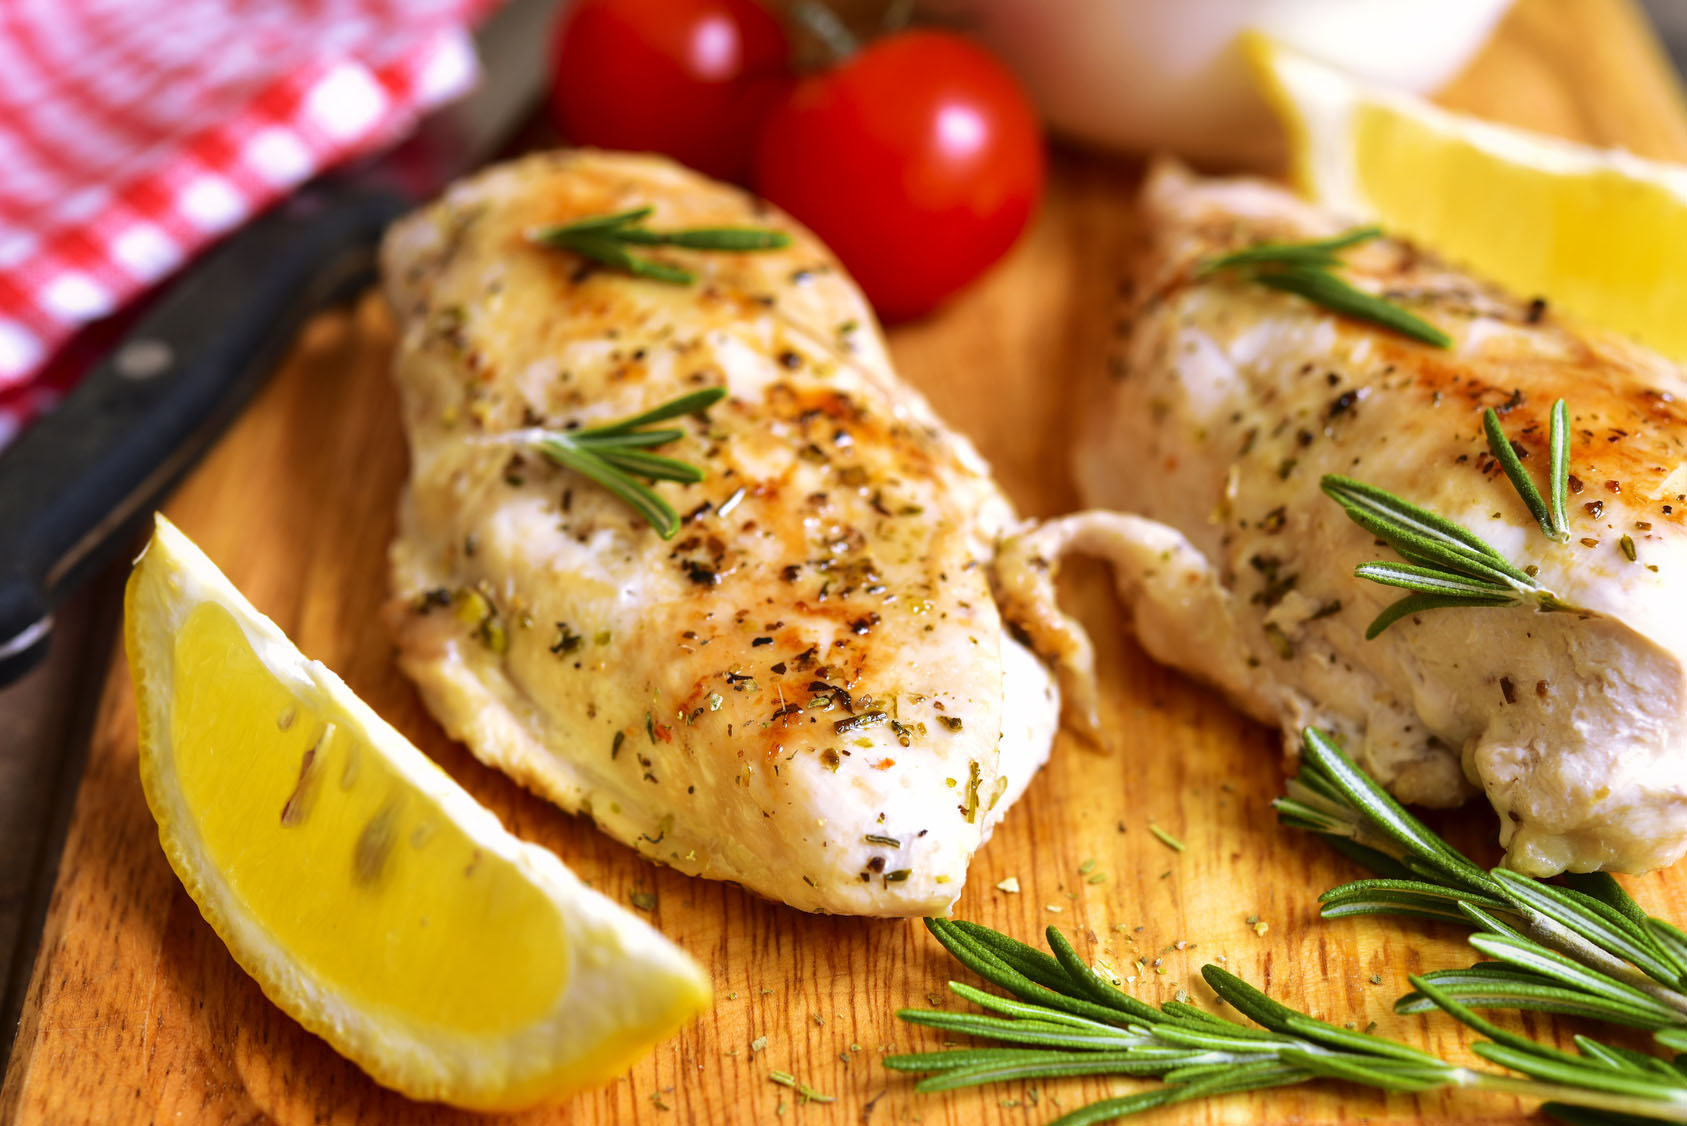 Chicken breast baked with rosemary.